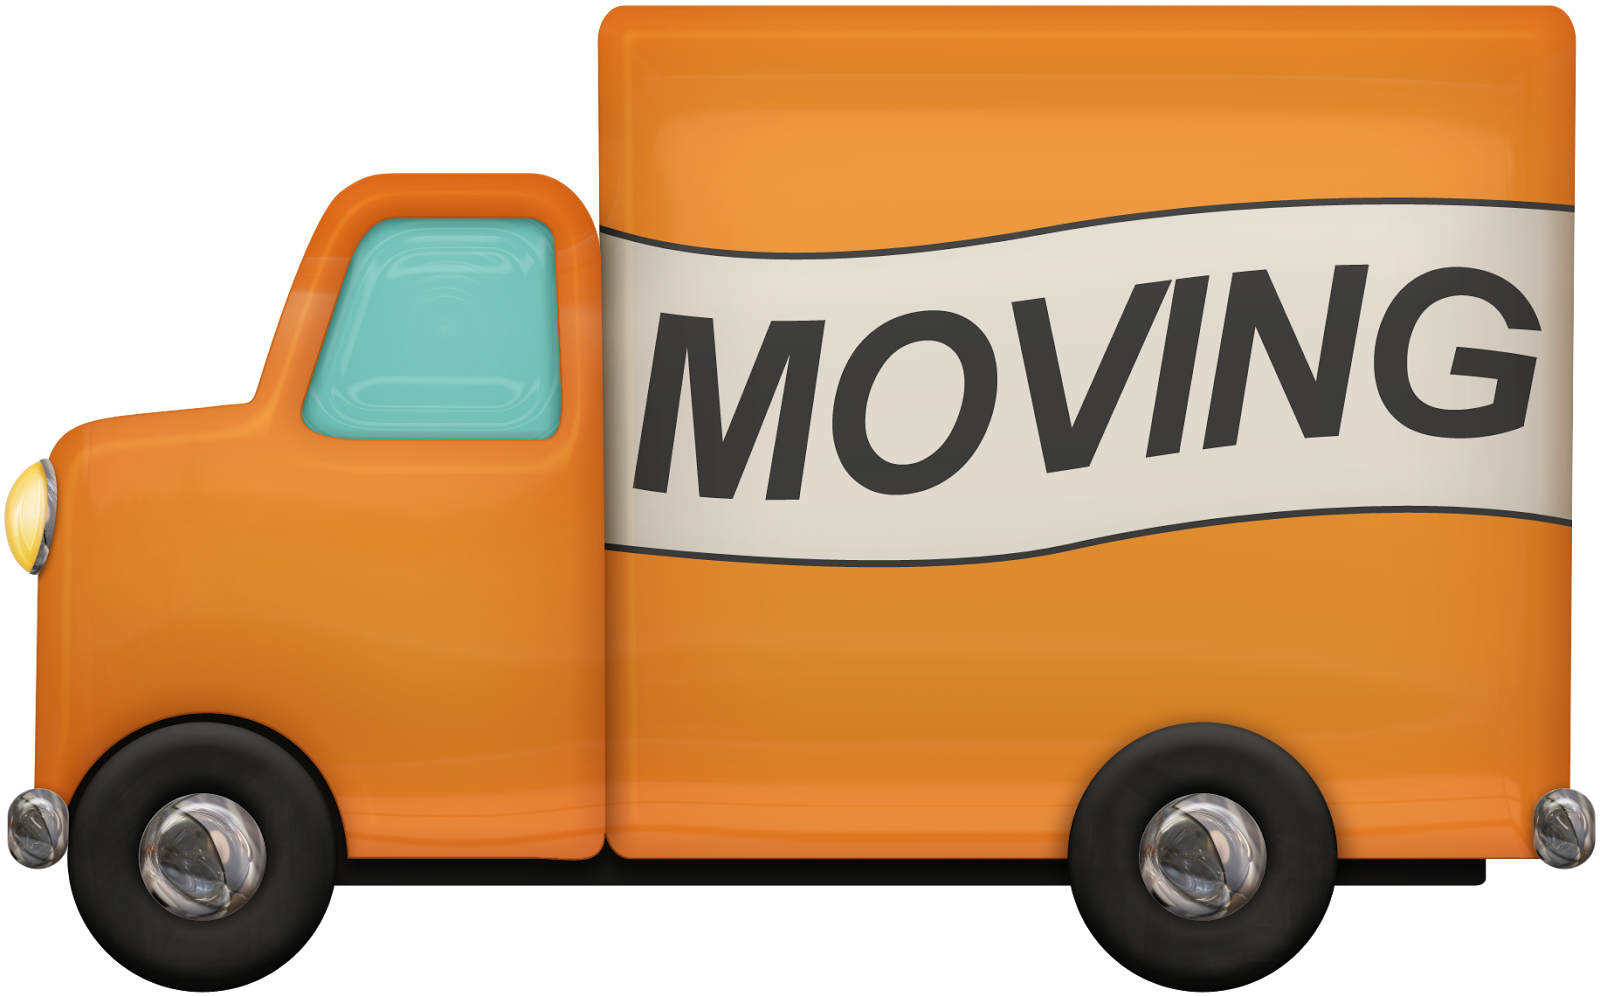  collection of van. Moving clipart cute